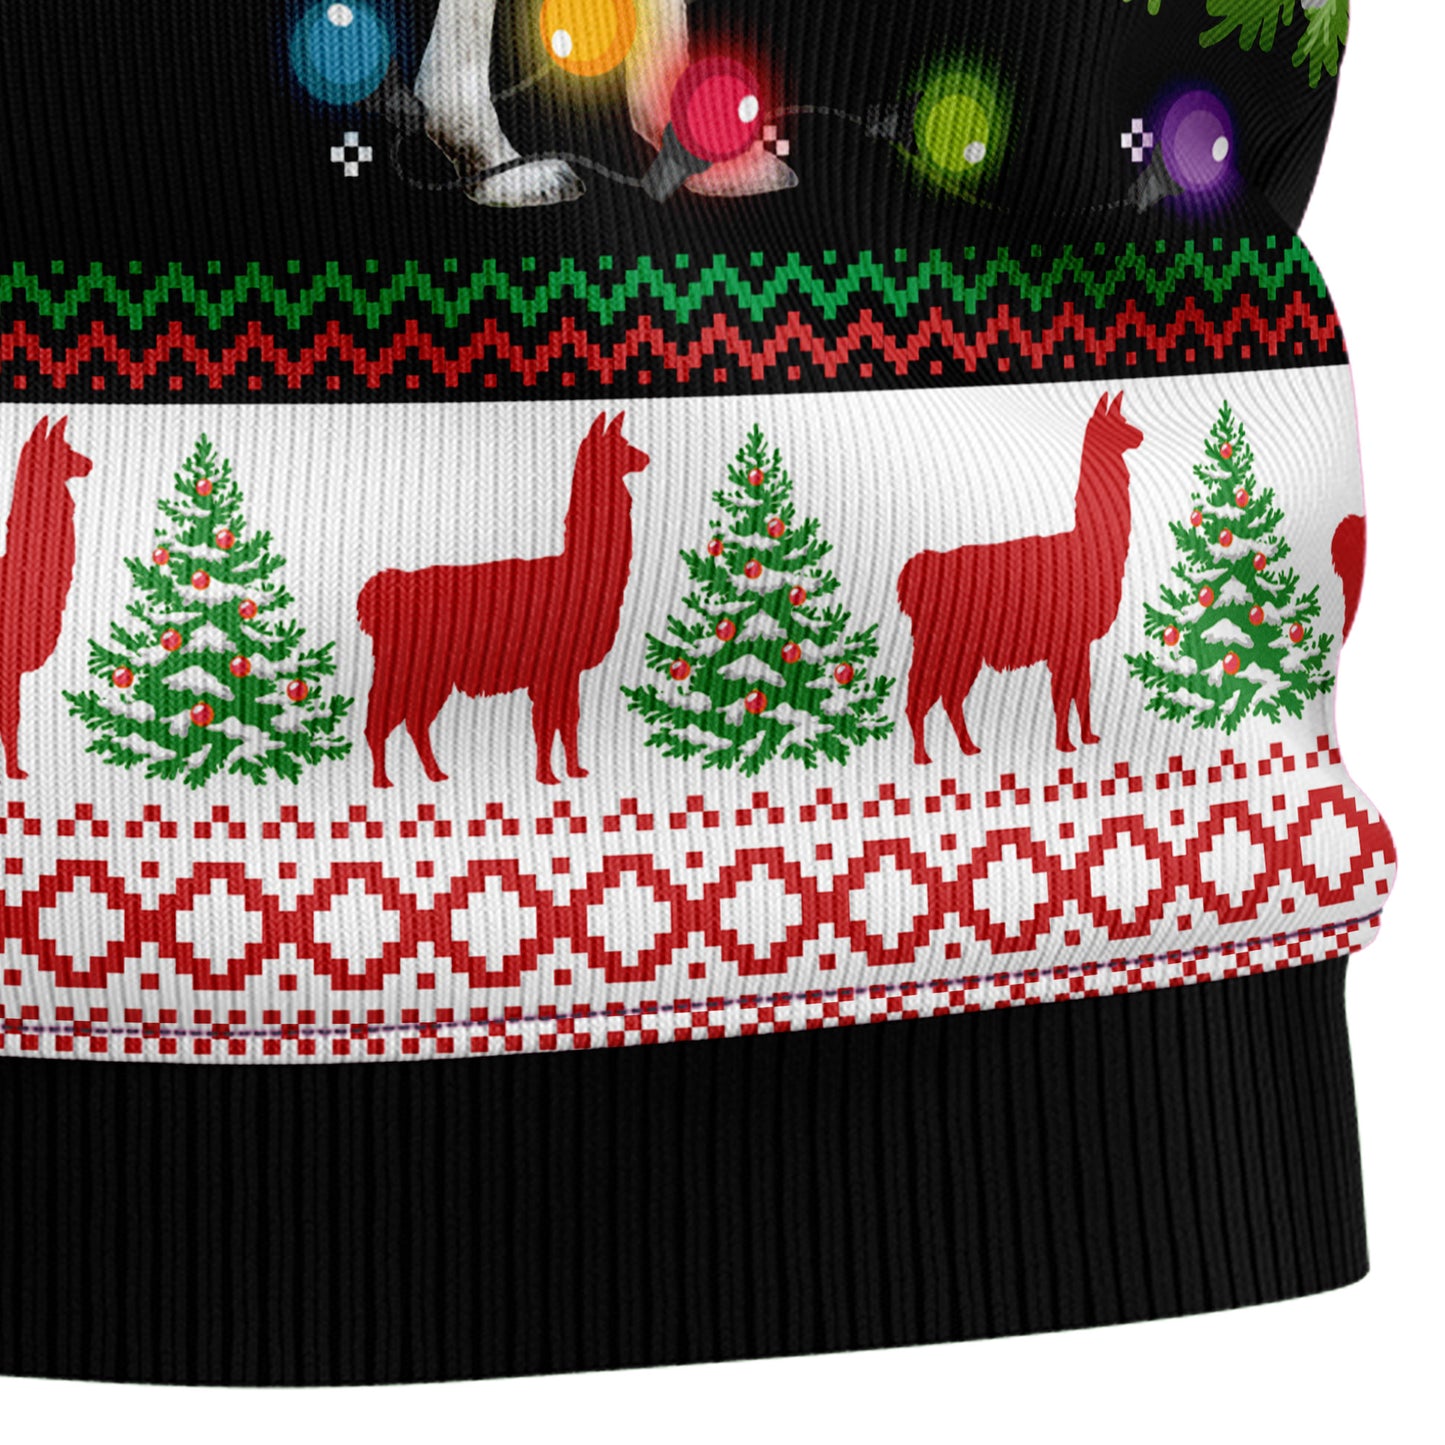 Llama Hit That D1410 Ugly Christmas Sweater